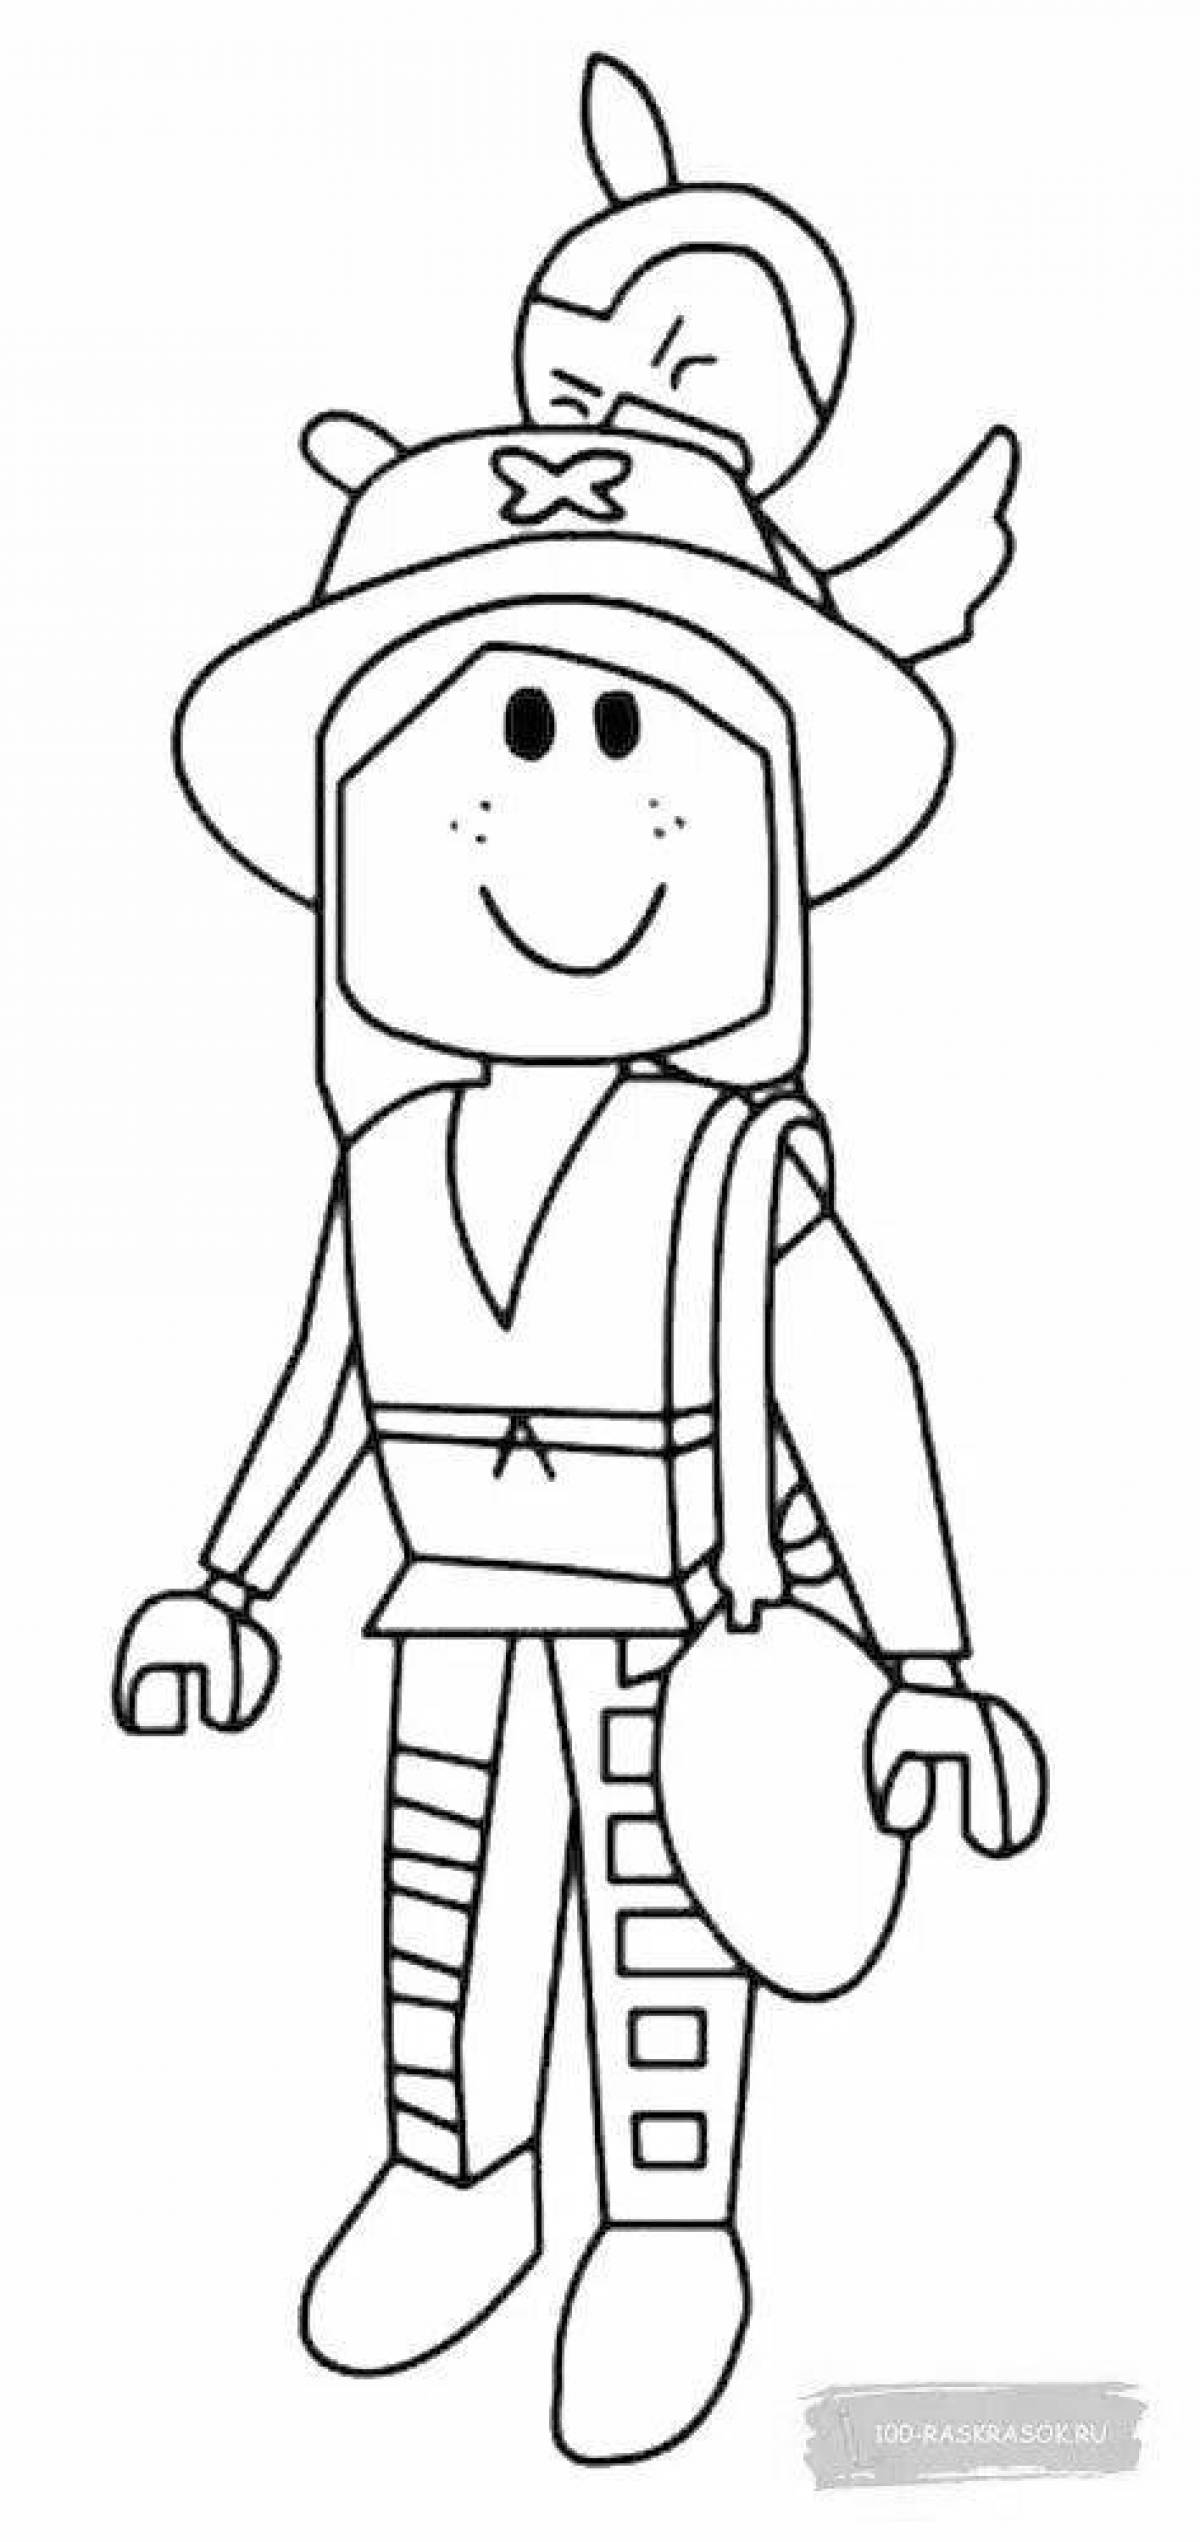 Vibrant roblox girl coloring page